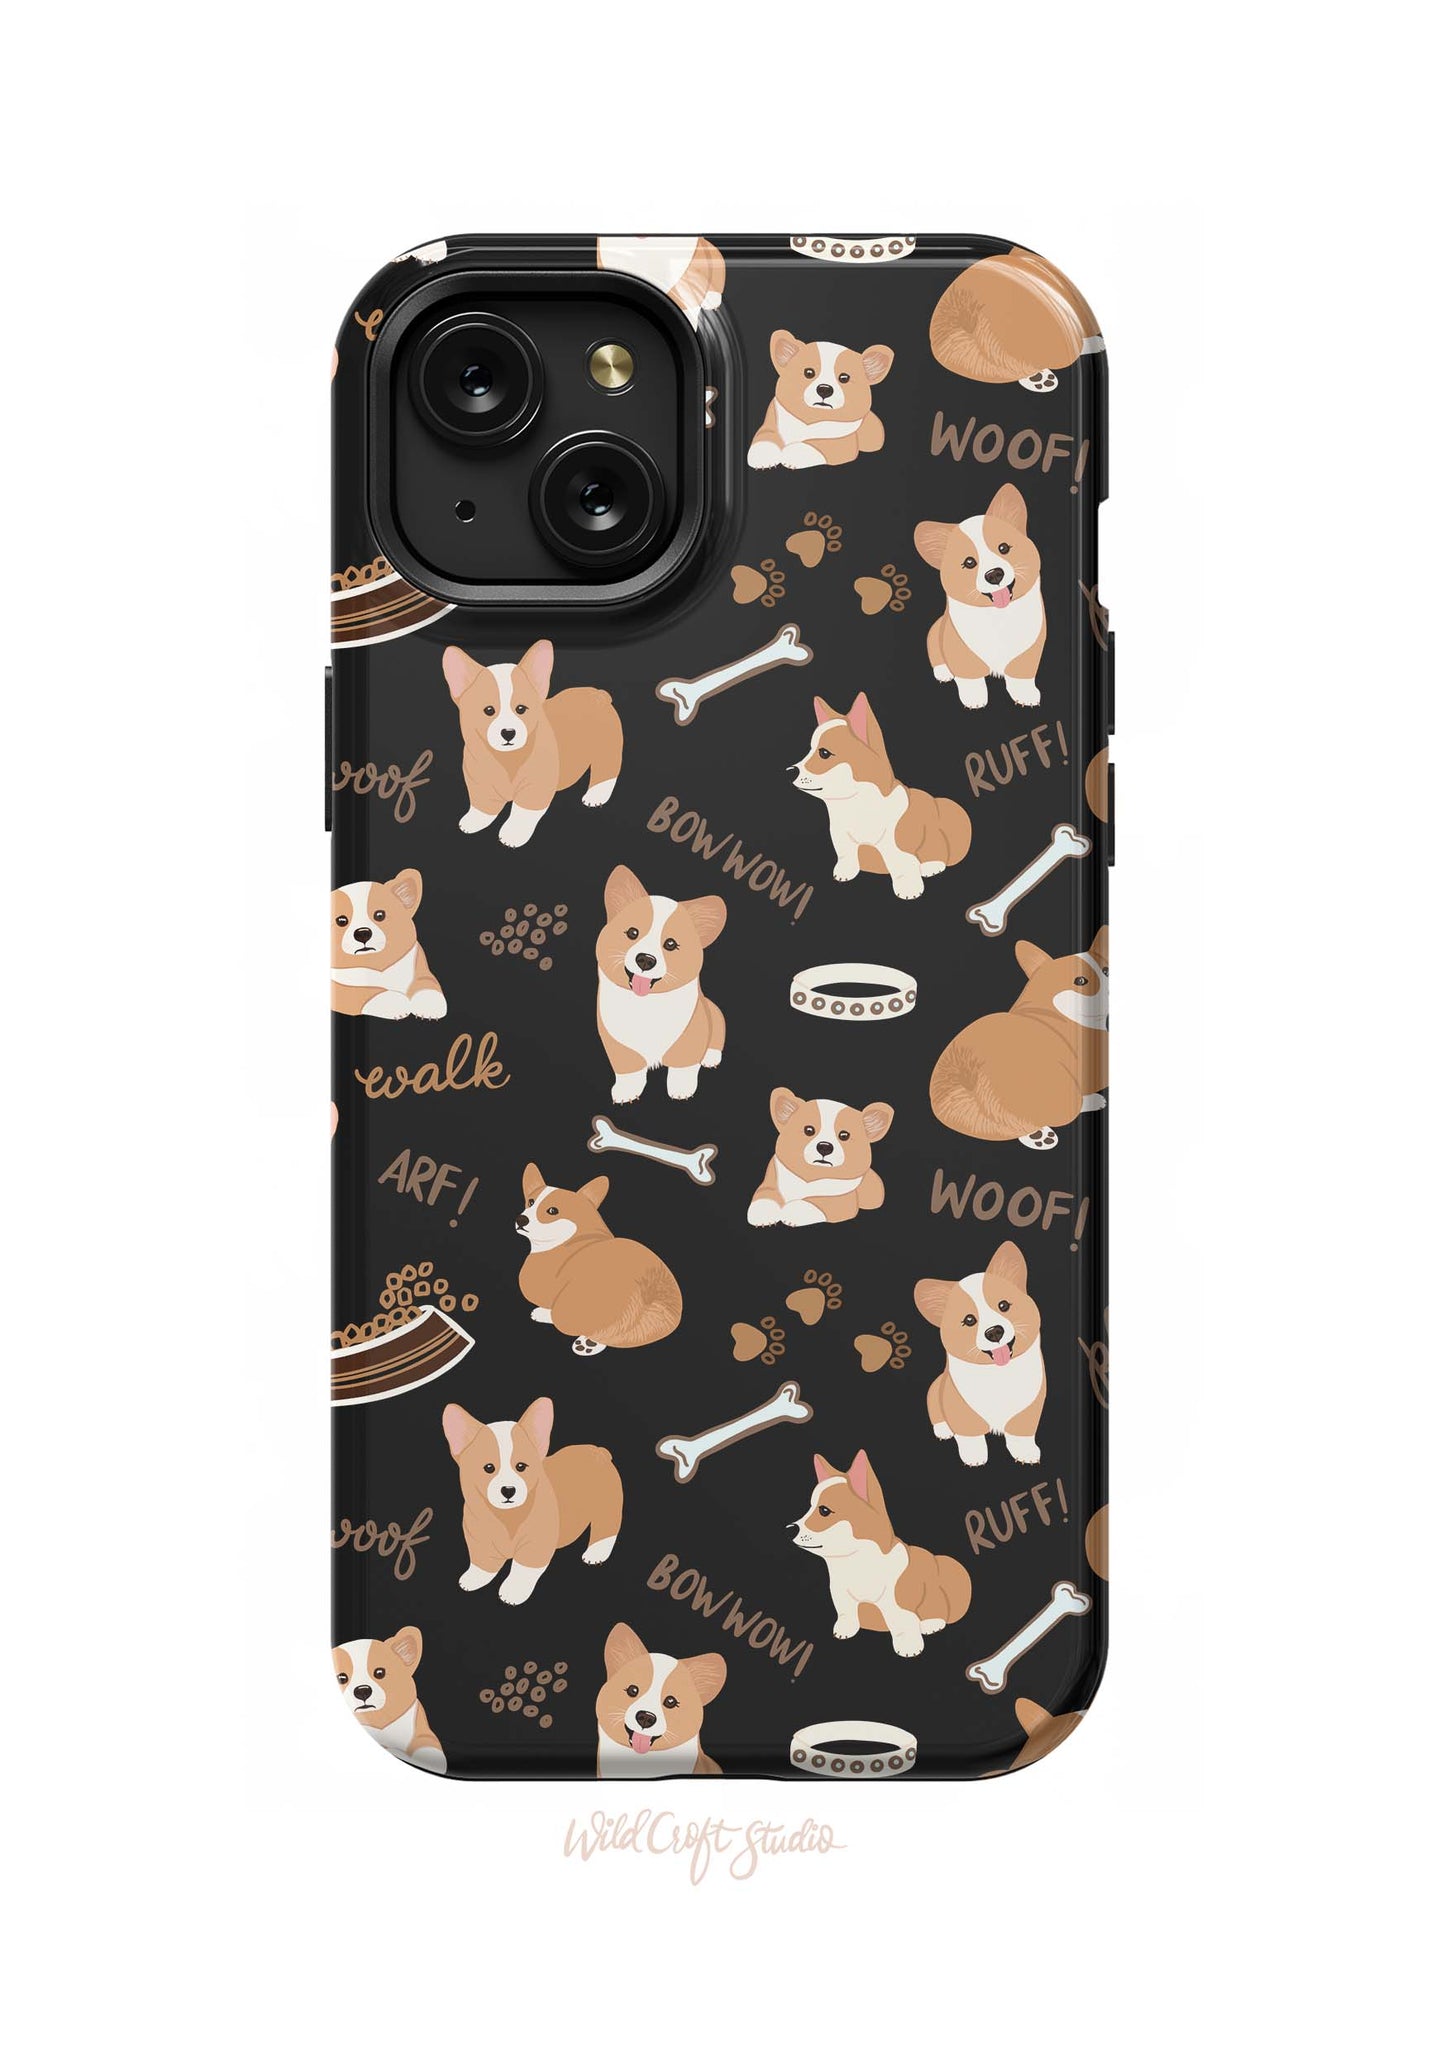 a phone case with a dog pattern on it